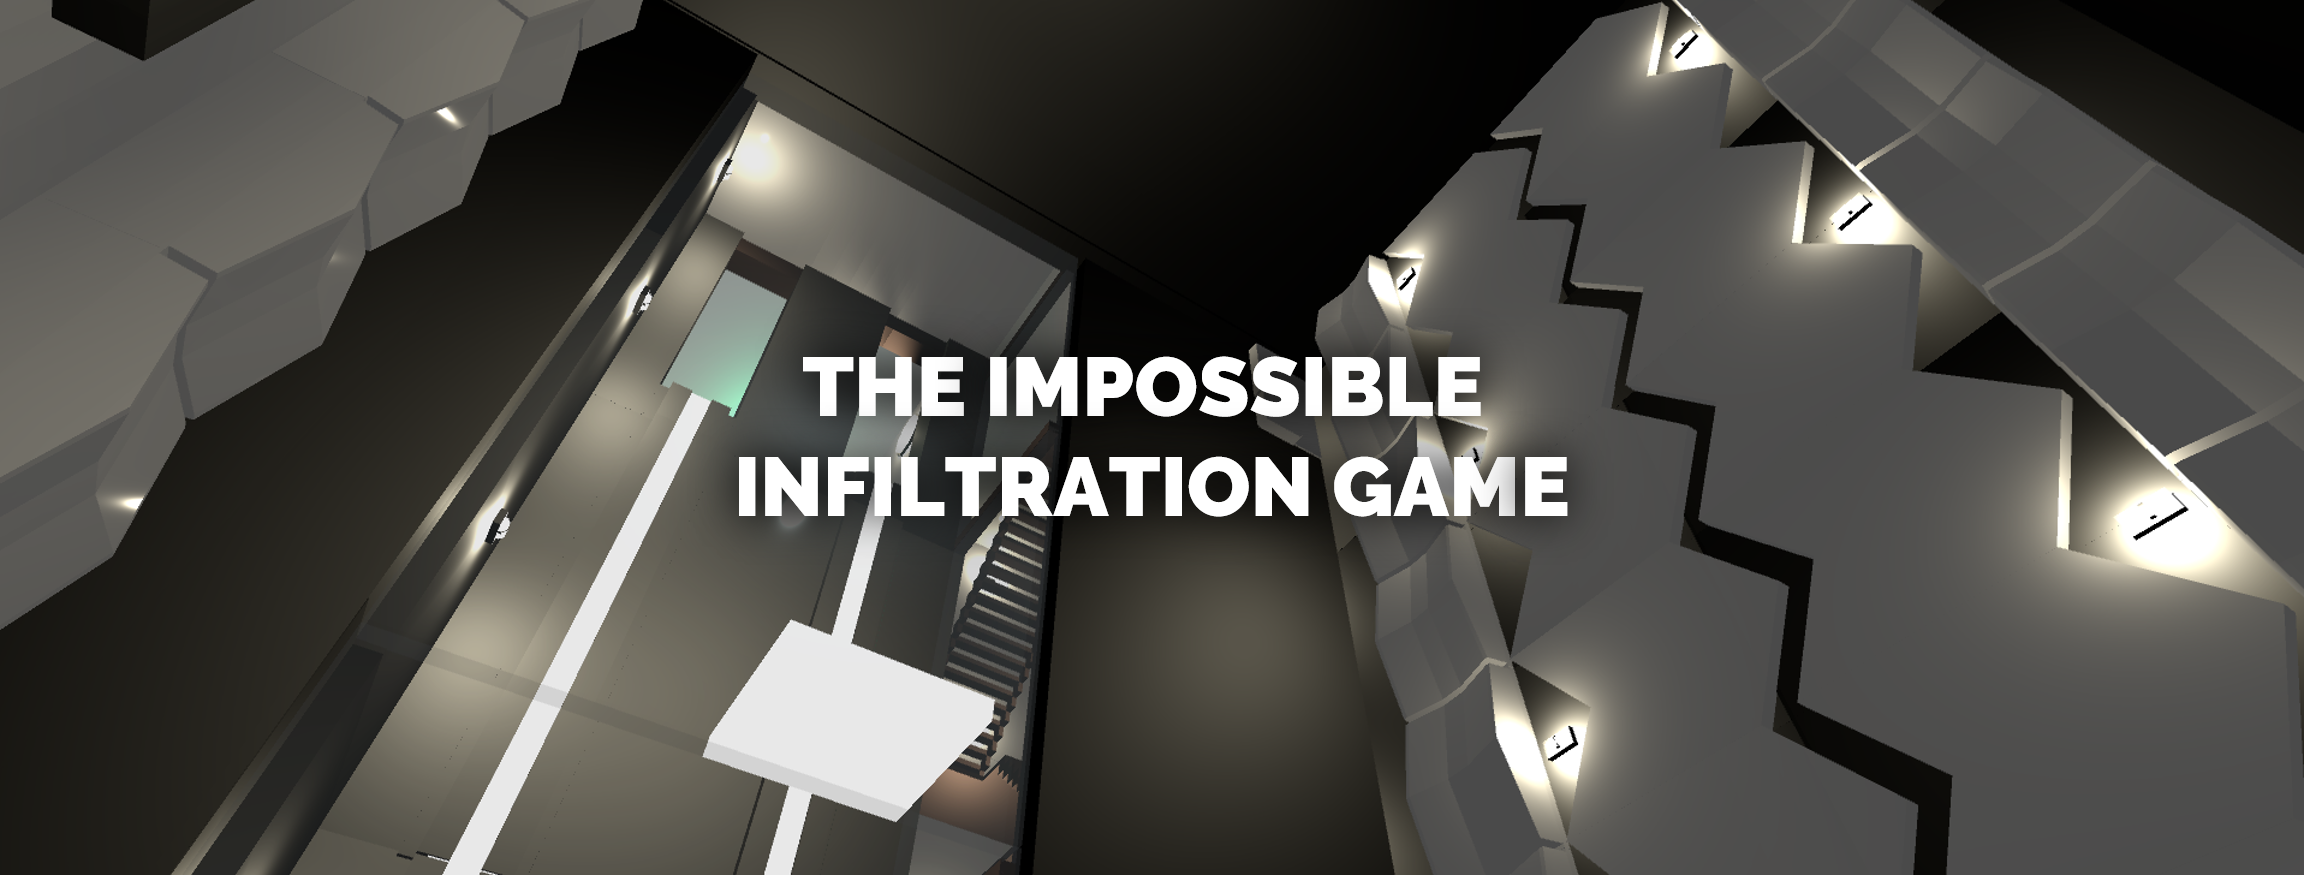 The Impossible Infiltration Game